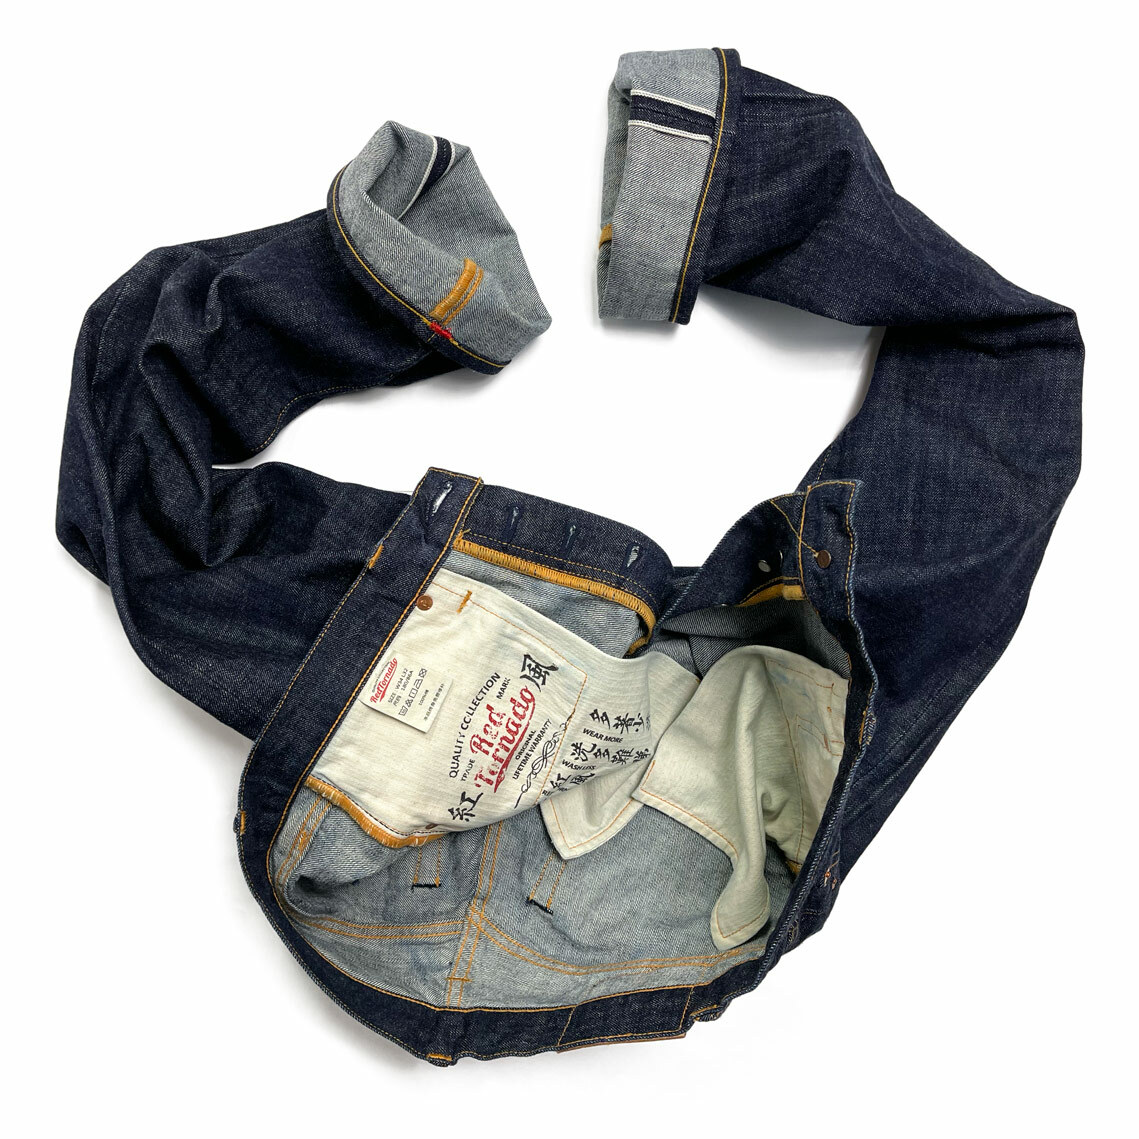 A pair of Red Tornado selvedge denim jeans with chain stitch hemming and a red bartack is artfully arranged to display the front details. The jeans are laid flat, showcasing the rich indigo hue of the raw denim, contrasted by the lighter interior fabric peeking through the unzipped fly. Subtle orange stitching highlights the construction, and a white fabric tag inscribed with care instructions is visible inside the waistband.